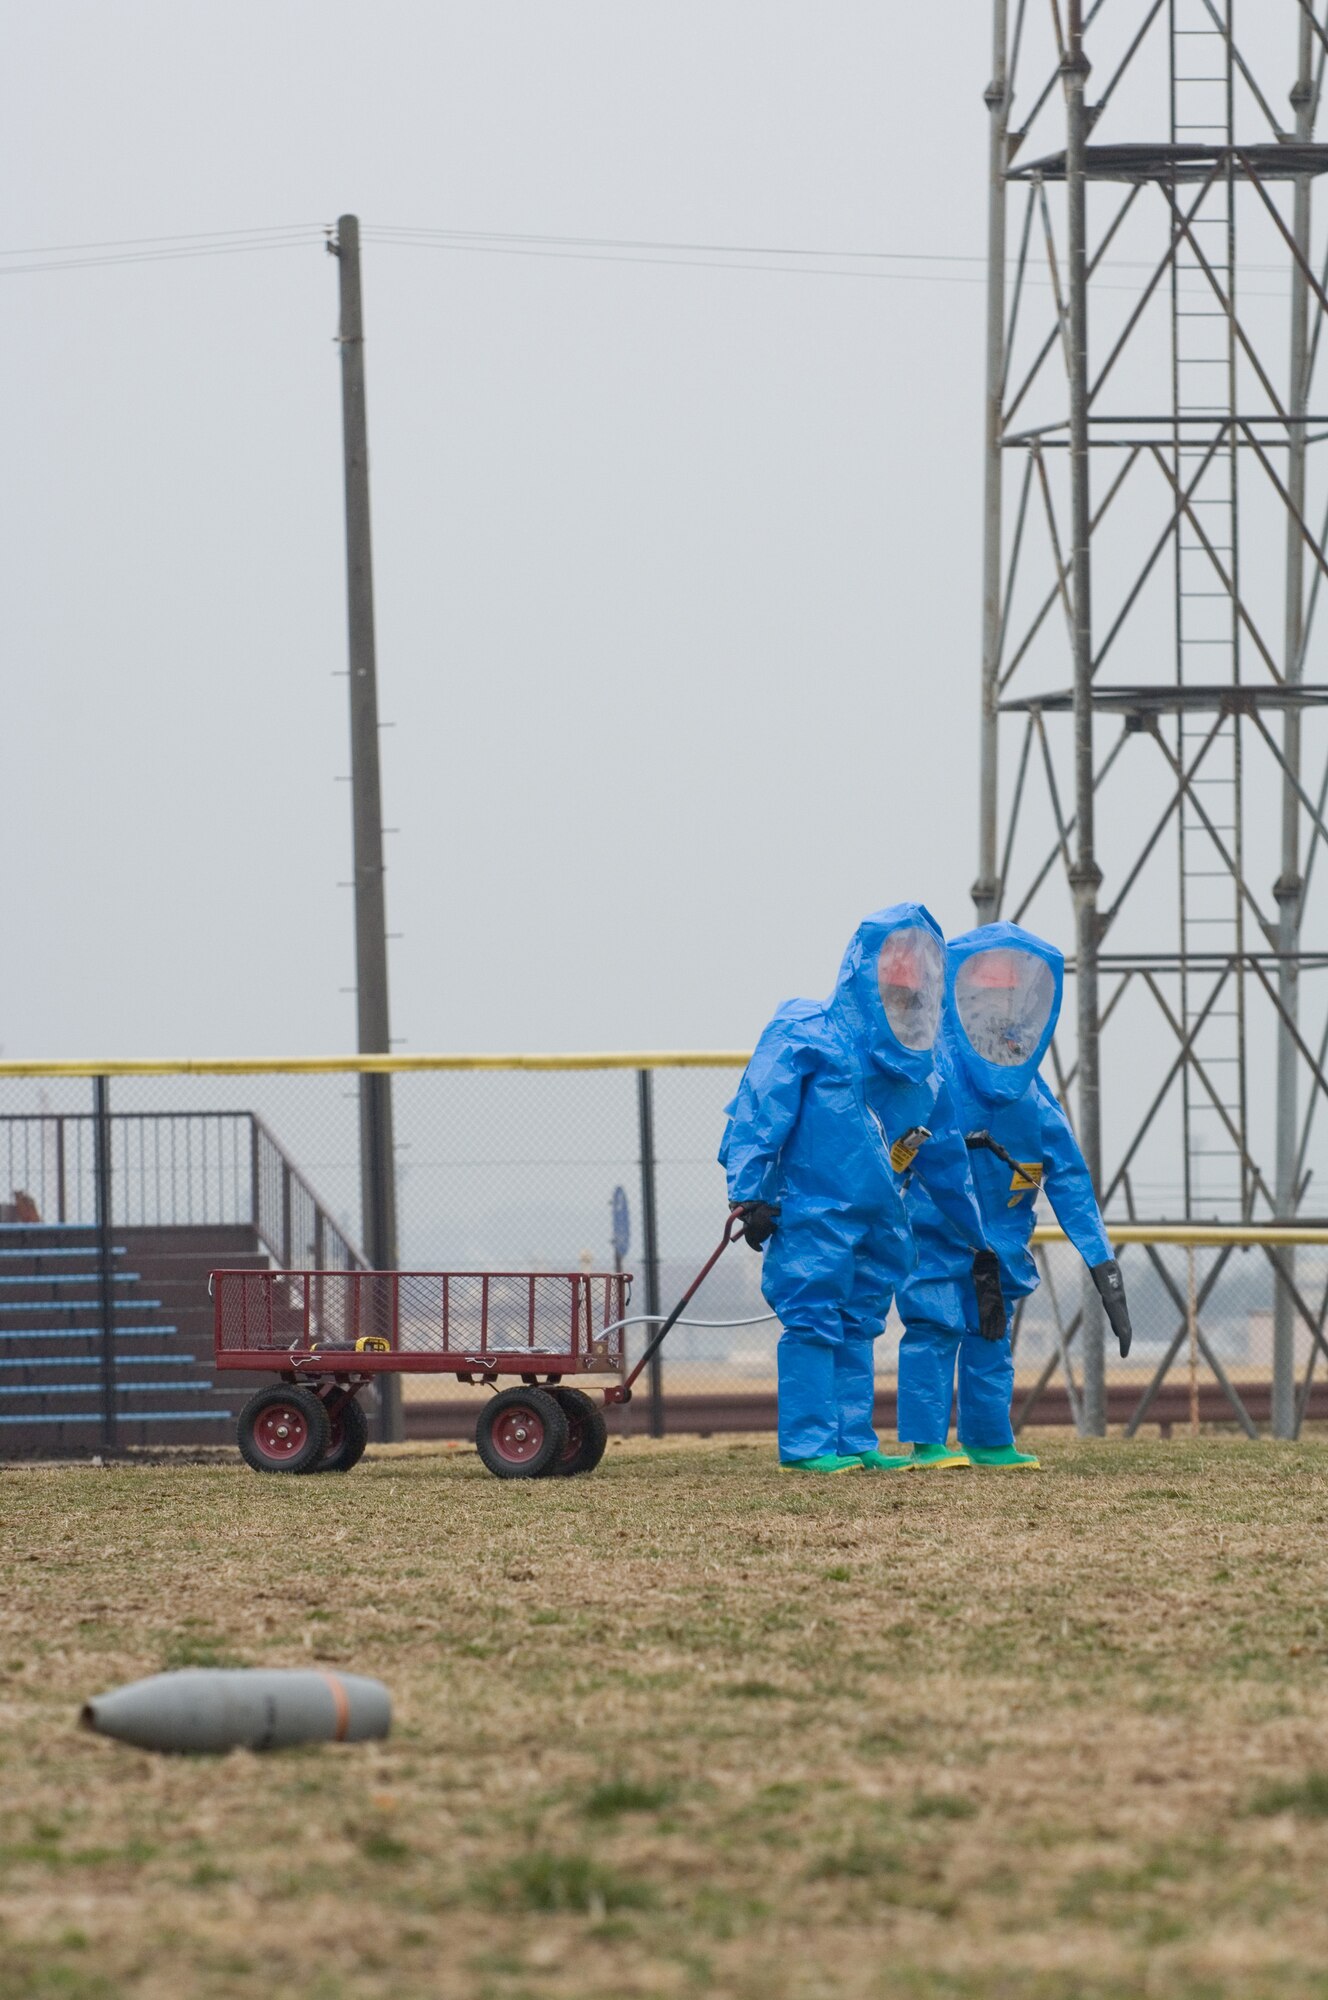 YOKOTA AIR BASE, Japan -- Airman Basic Joshua Chavez, 374th Aerospace Medicine Squadron, and Airman 1st Class Sean Gold, 374th Civil Engineer Squadron, investigate a simulated contaminated area during a chemical response exercise here Feb. 24. The exercise was part of All Hazards Response Training to prepare 374th Airlift Wing Airmen to respond appropriately to a chemical incident. (U.S. Air Force photo/Osakabe Yasuo)
